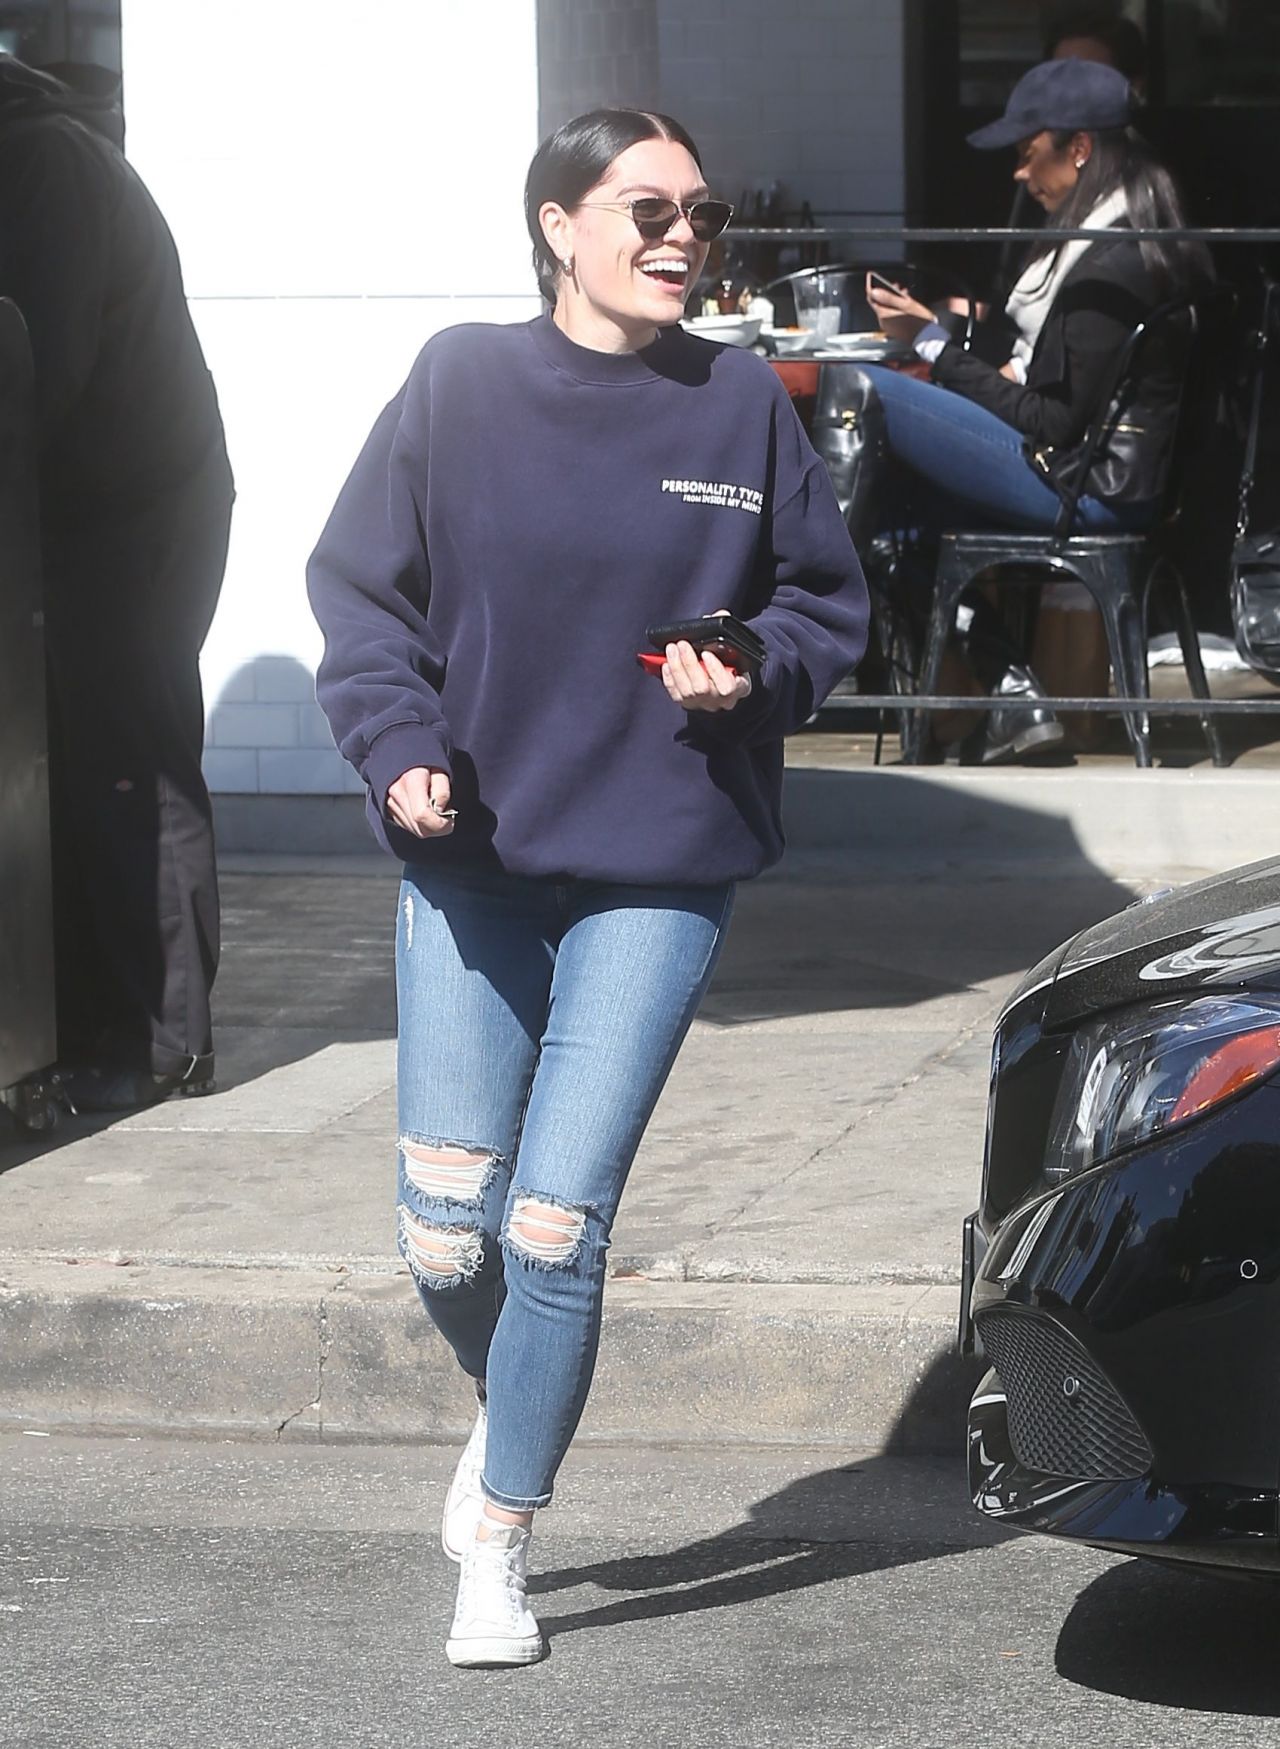 Jessie J in Ripped Jeans Out in LA, February 2018